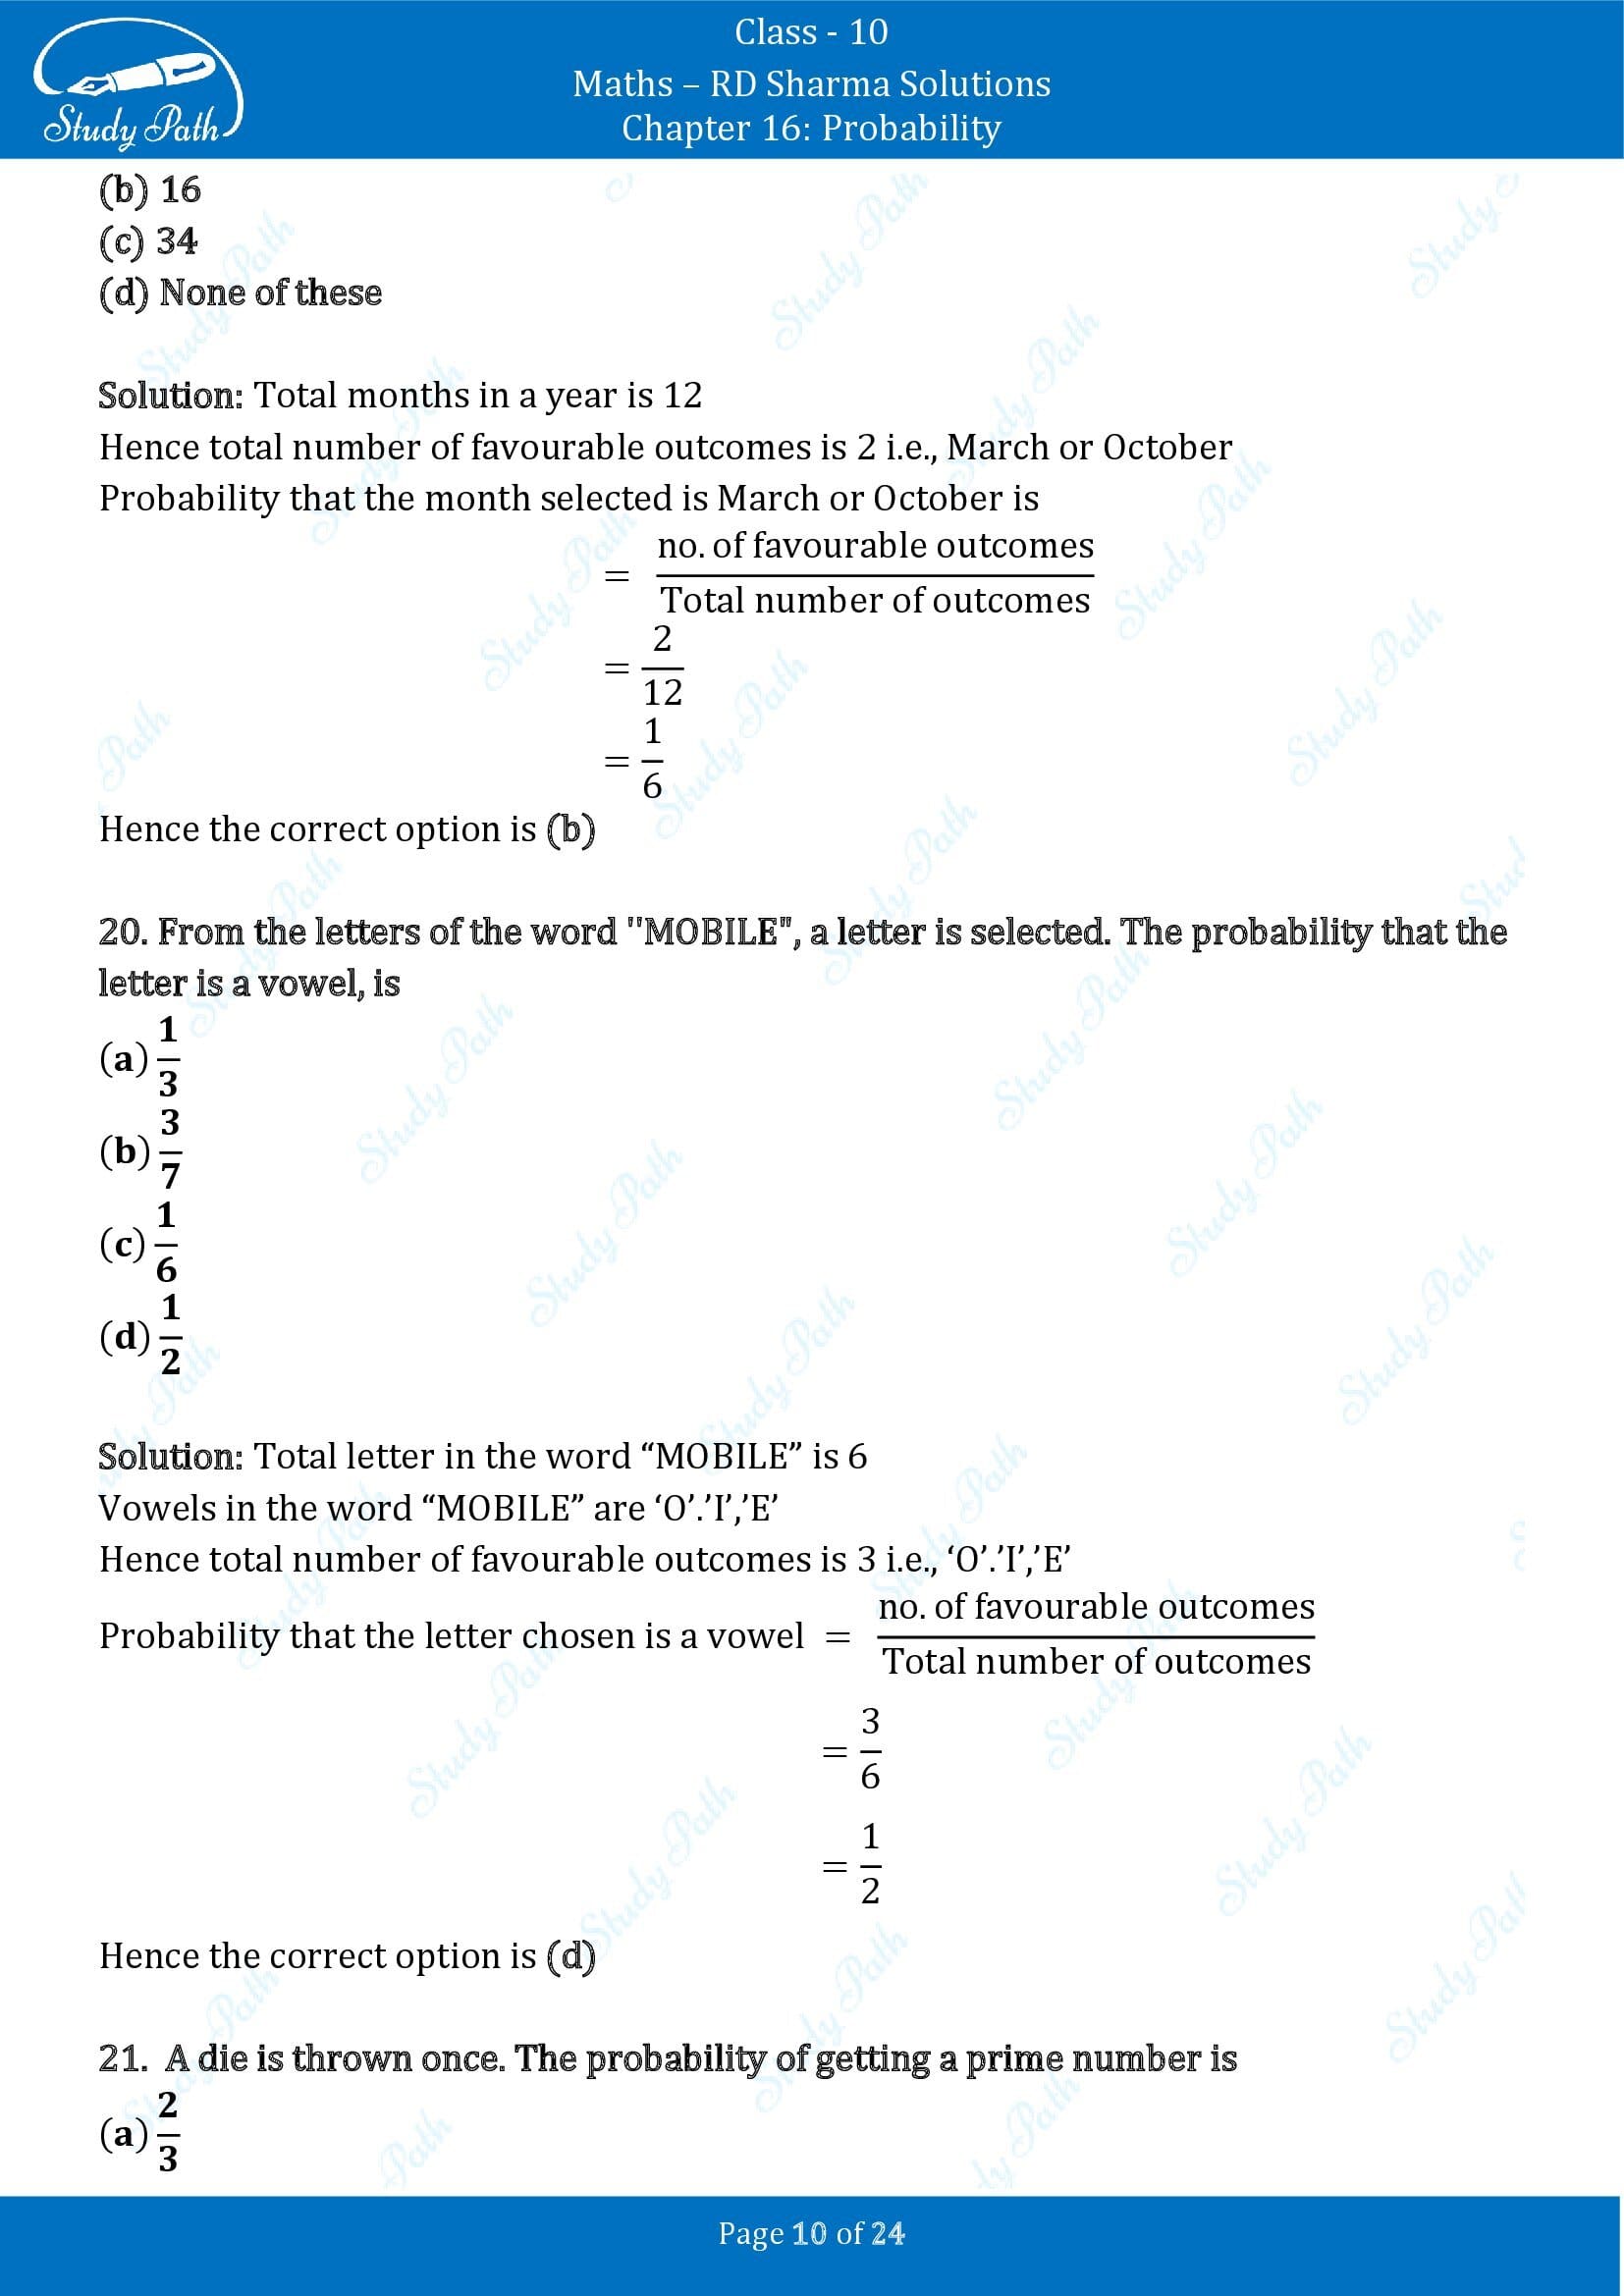 RD Sharma Solutions Class 10 Chapter 16 Probability Multiple Choice Question MCQs 00010